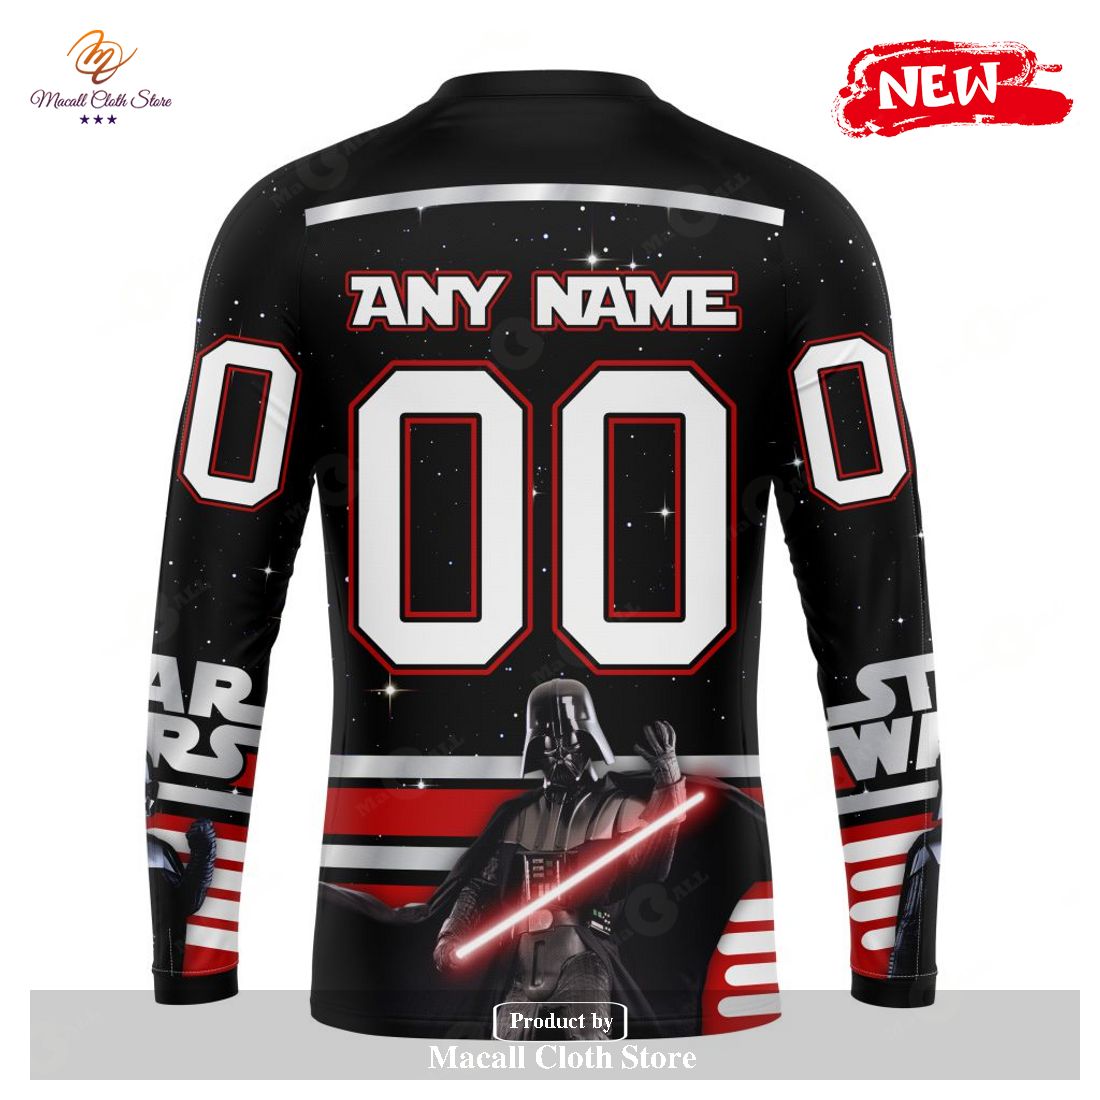 Personalized NHL Detroit Red Wings Special Star Wars Design May